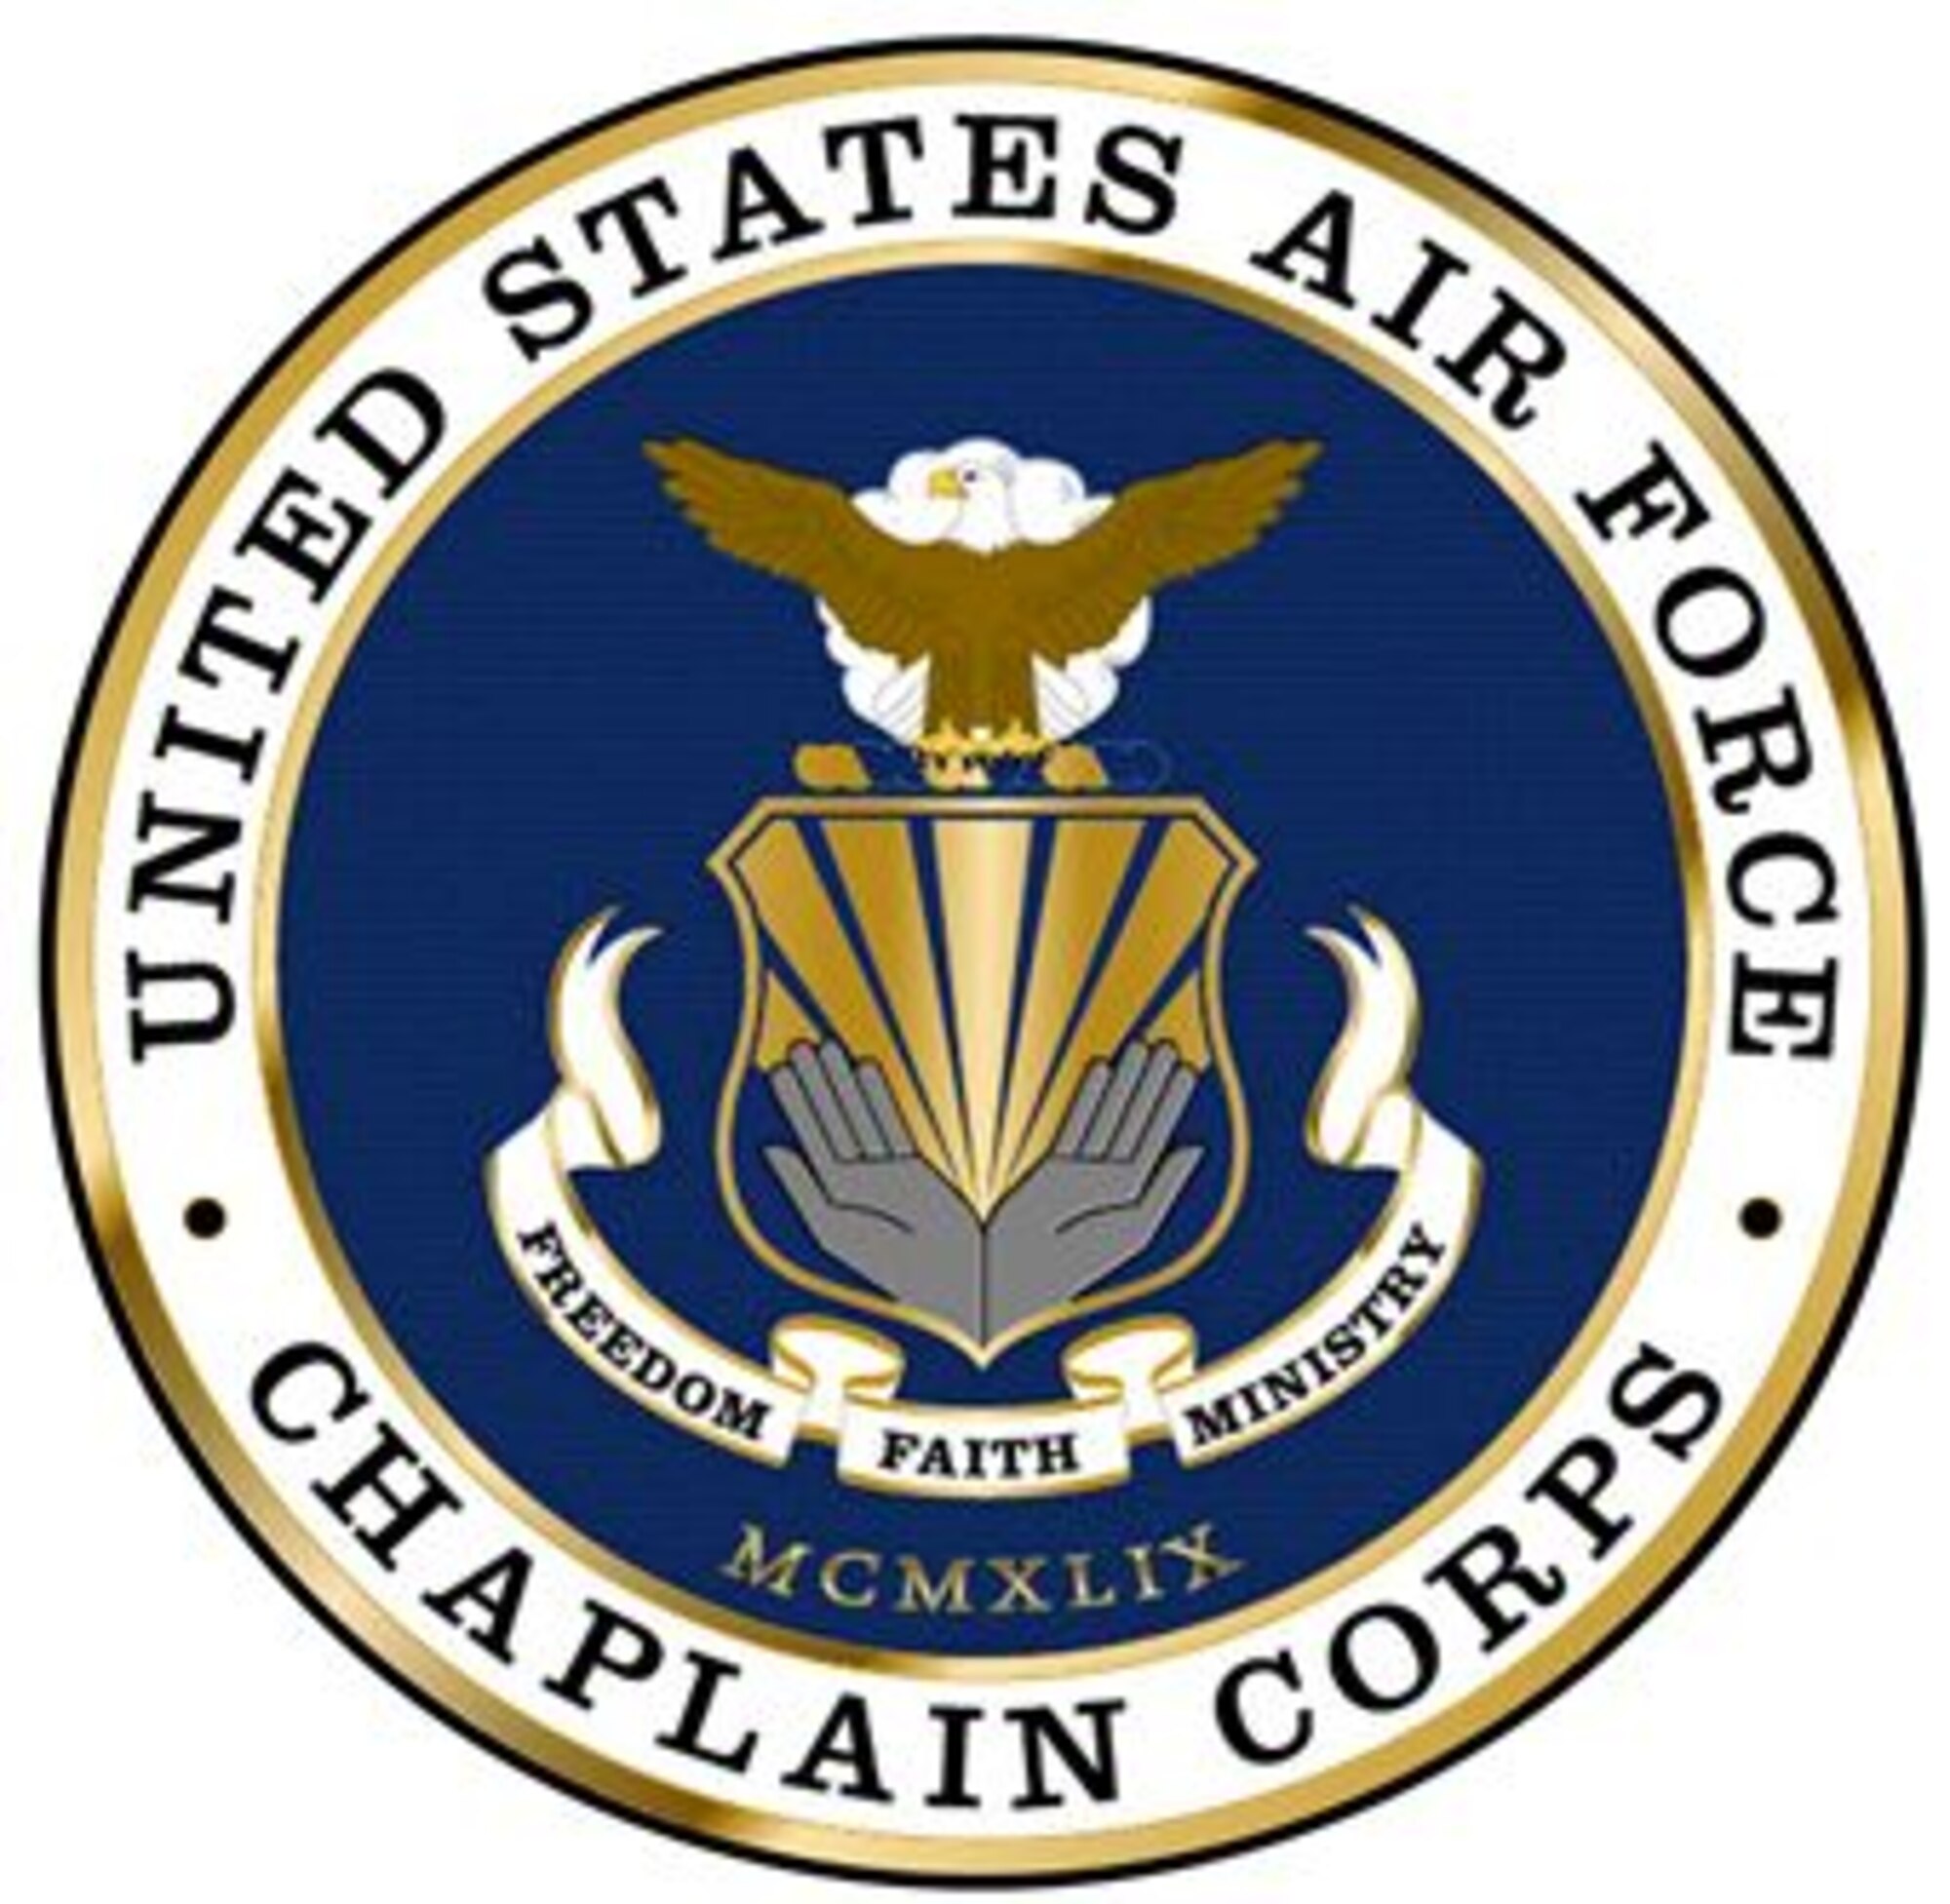 The Air Force Chaplain Corps provides spiritual care and the opportunity for Airmen, their families, and other authorized personnel to exercise their constitutional right to the free exercise of religion. This is accomplished through religious observances, providing pastoral care, and advising leadership on spiritual, ethical, moral, morale, core values, and religious accommodation issues.(U.S. Air Force graphic redesign/Staff Sgt. Luis Loza Gutierrez)